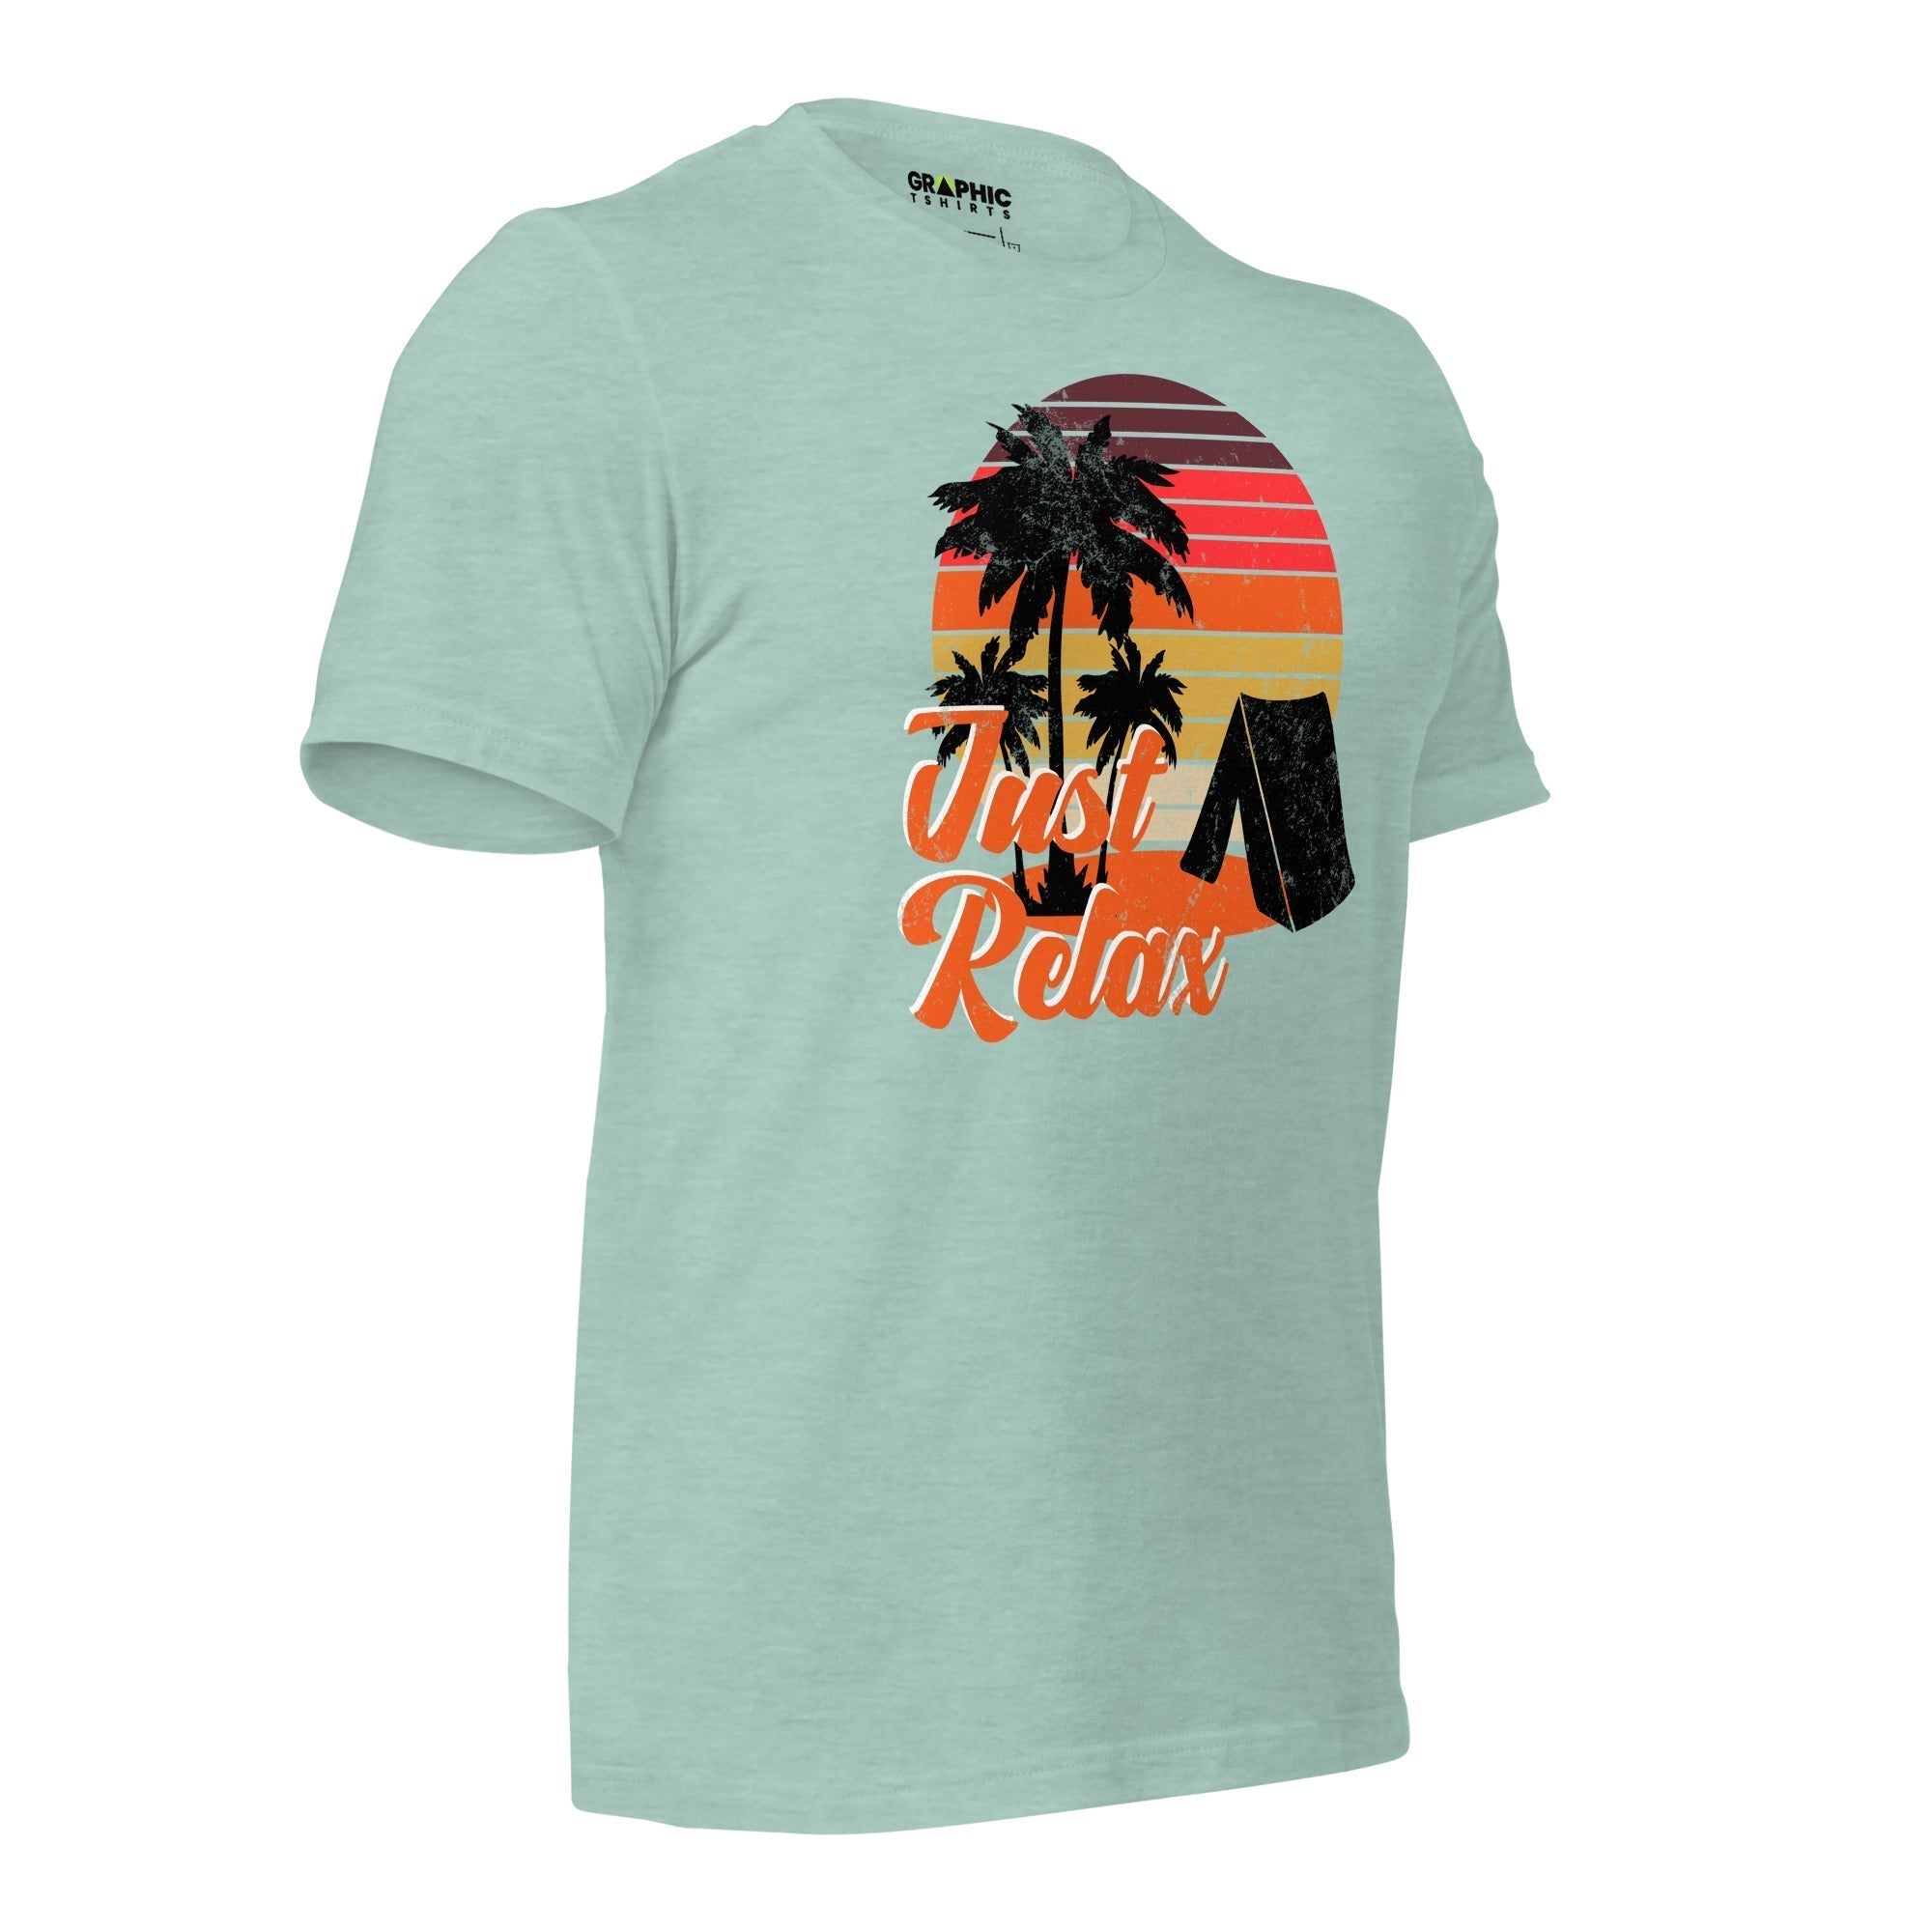 Unisex Staple T-Shirt - Just Relax Sunset Camping - GRAPHIC T-SHIRTS